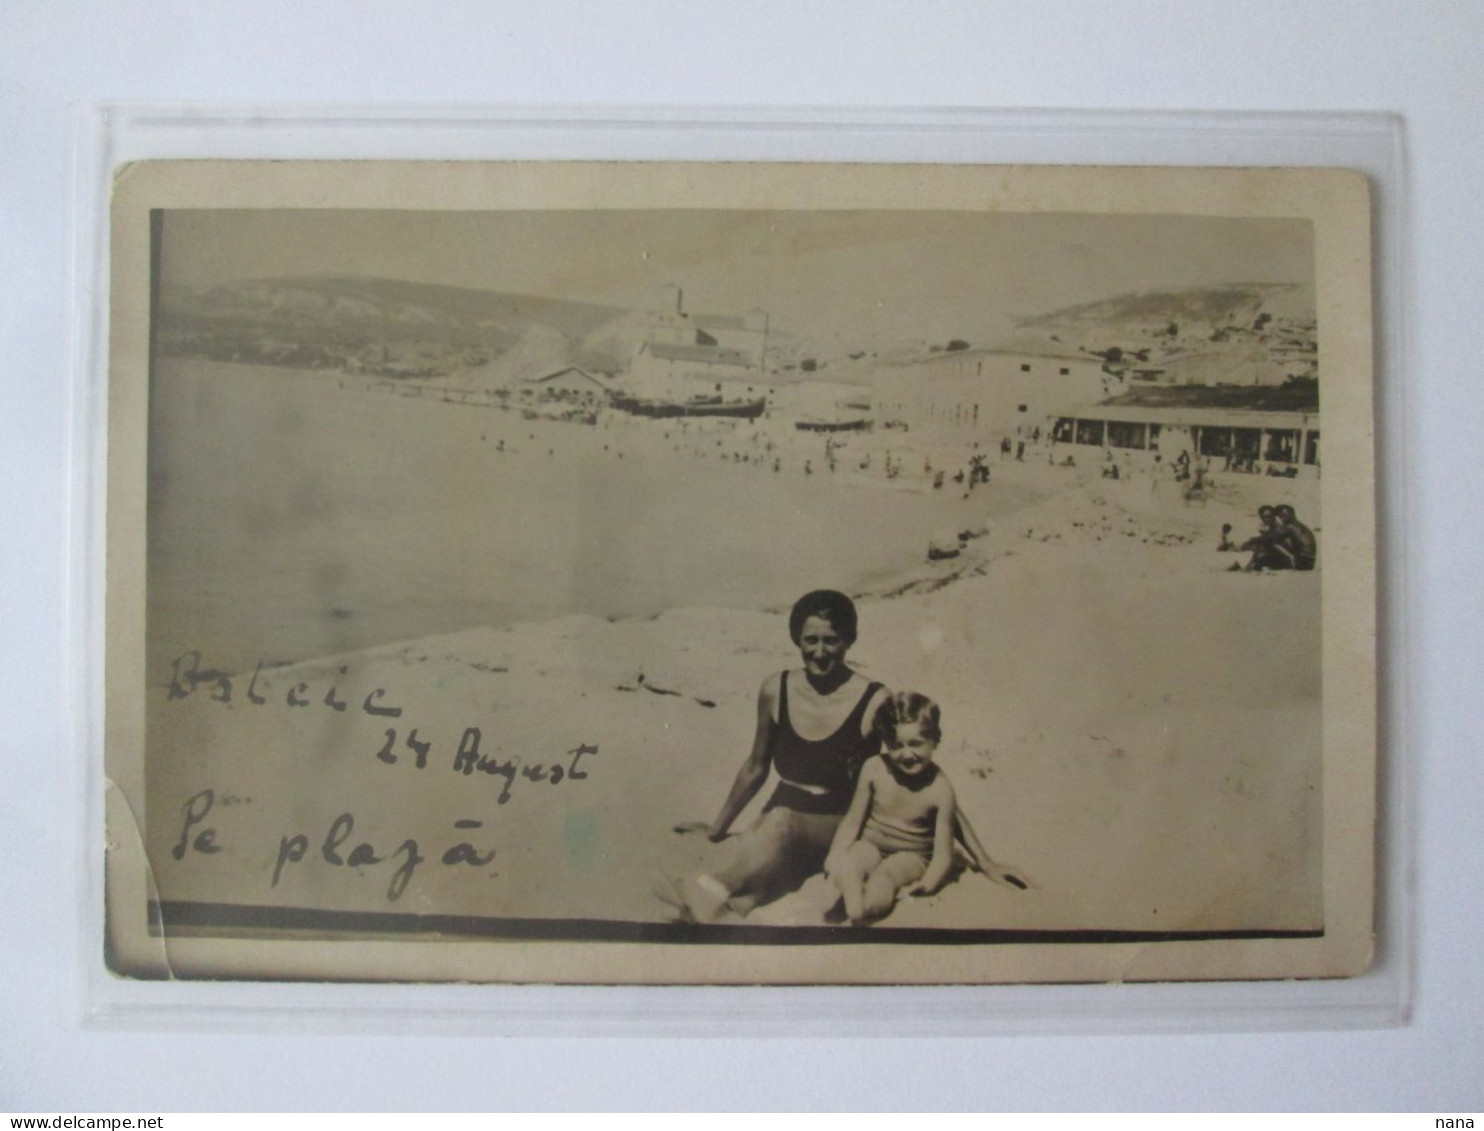 Bulgaria Former Romania-Balcic:Photo Postcard On The Beach From The 30s,see Pictures - Bulgarien